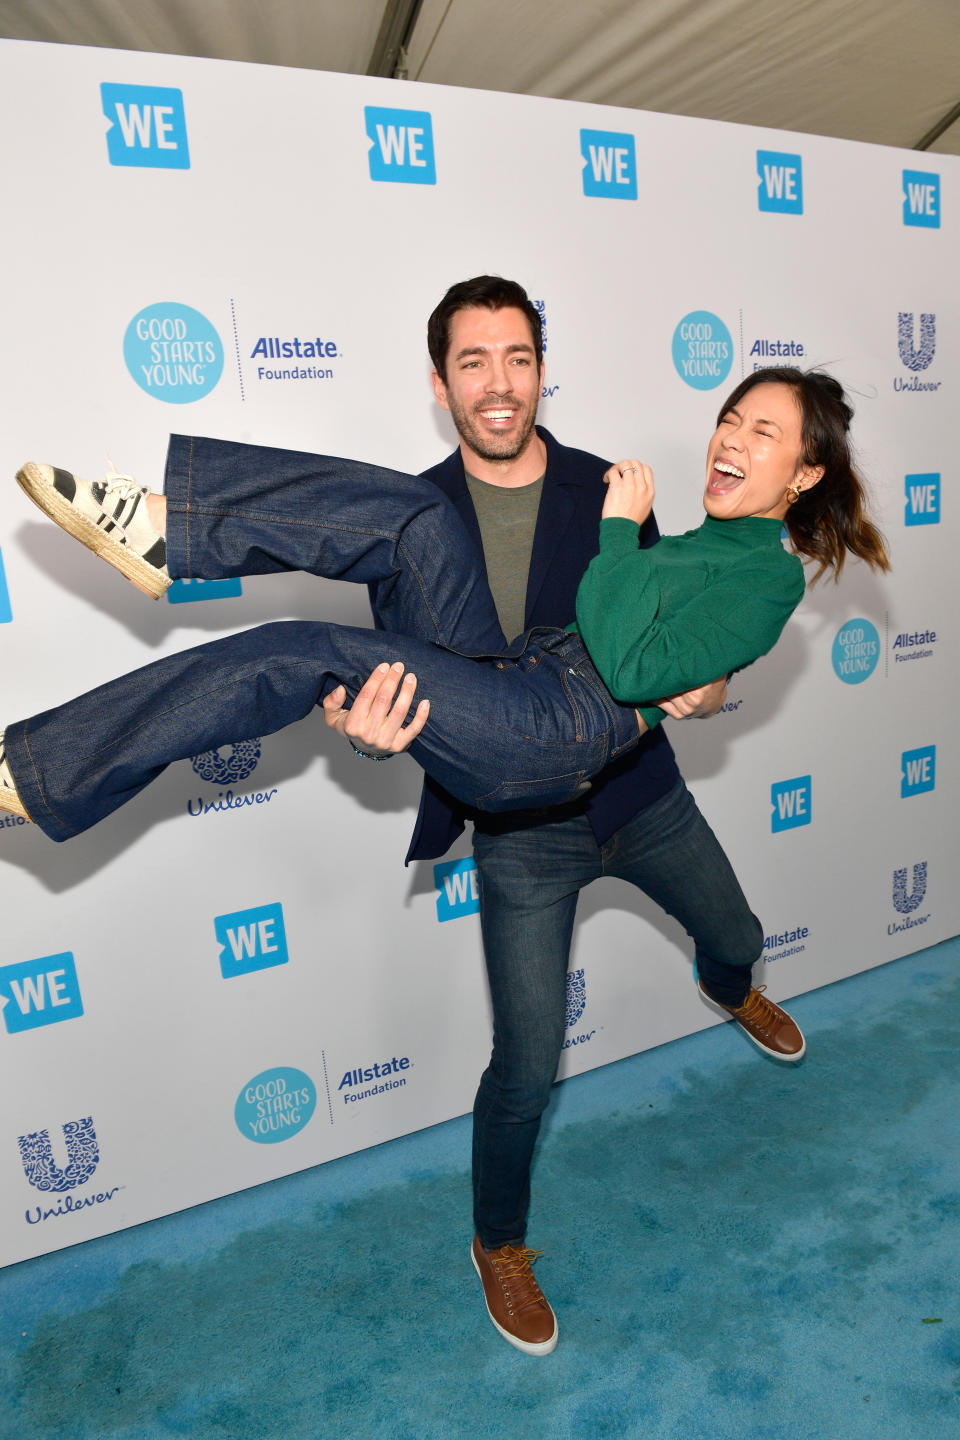 INGLEWOOD, CA - APRIL 19:  Drew Scott (L) and Linda Phan attend WE Day California at The Forum on April 19, 2018 in Inglewood, California.  (Photo by Matt Winkelmeyer/Getty Images)